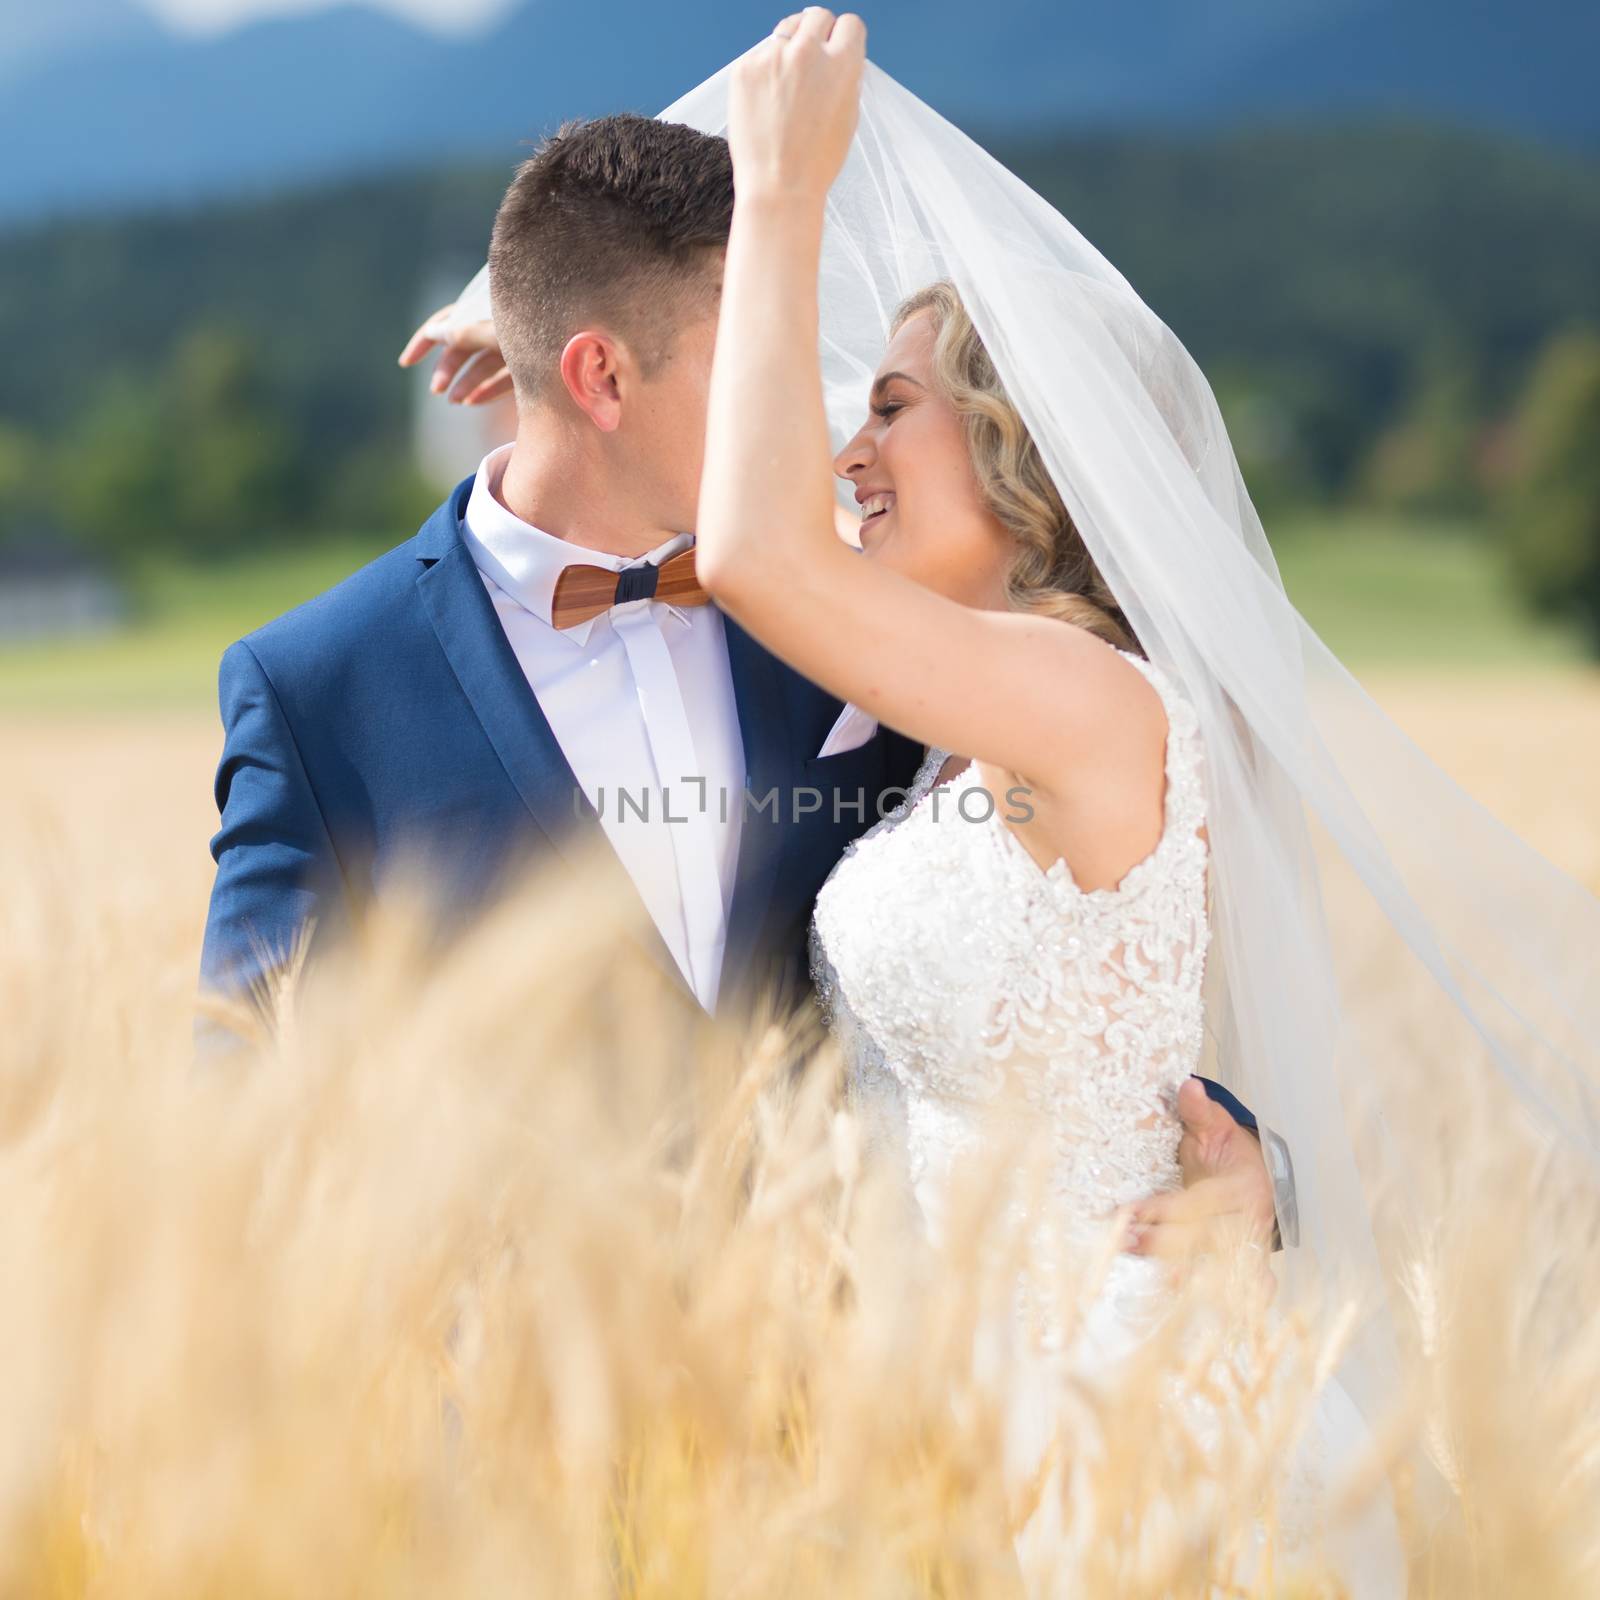 Groom hugs bride tenderly while wind blows her veil in wheat field somewhere in Slovenian countryside. by kasto